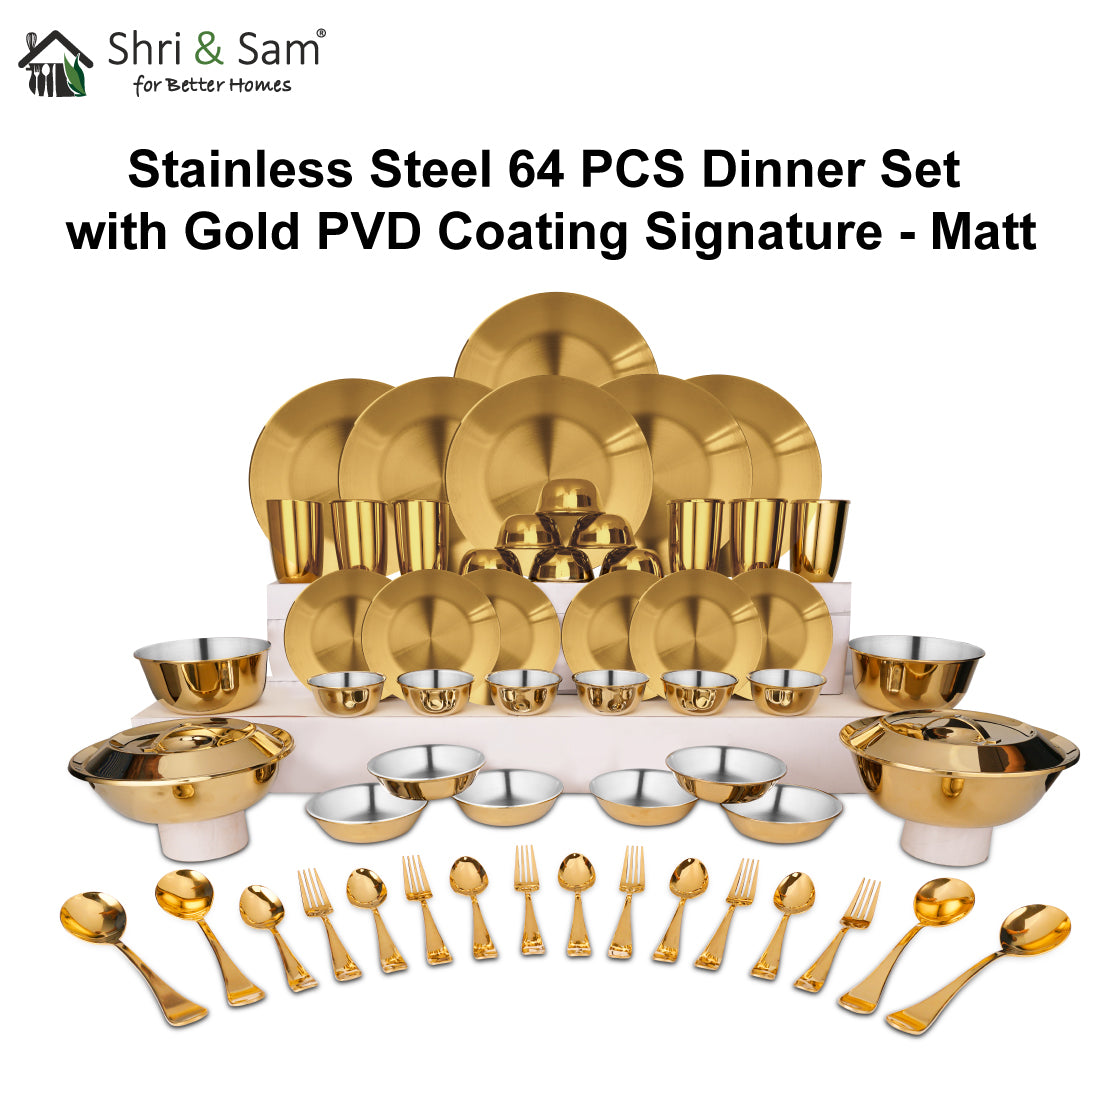 Stainless Steel 64 PCS Dinner Set (6 People) with Gold PVD Coating Signature - Matt